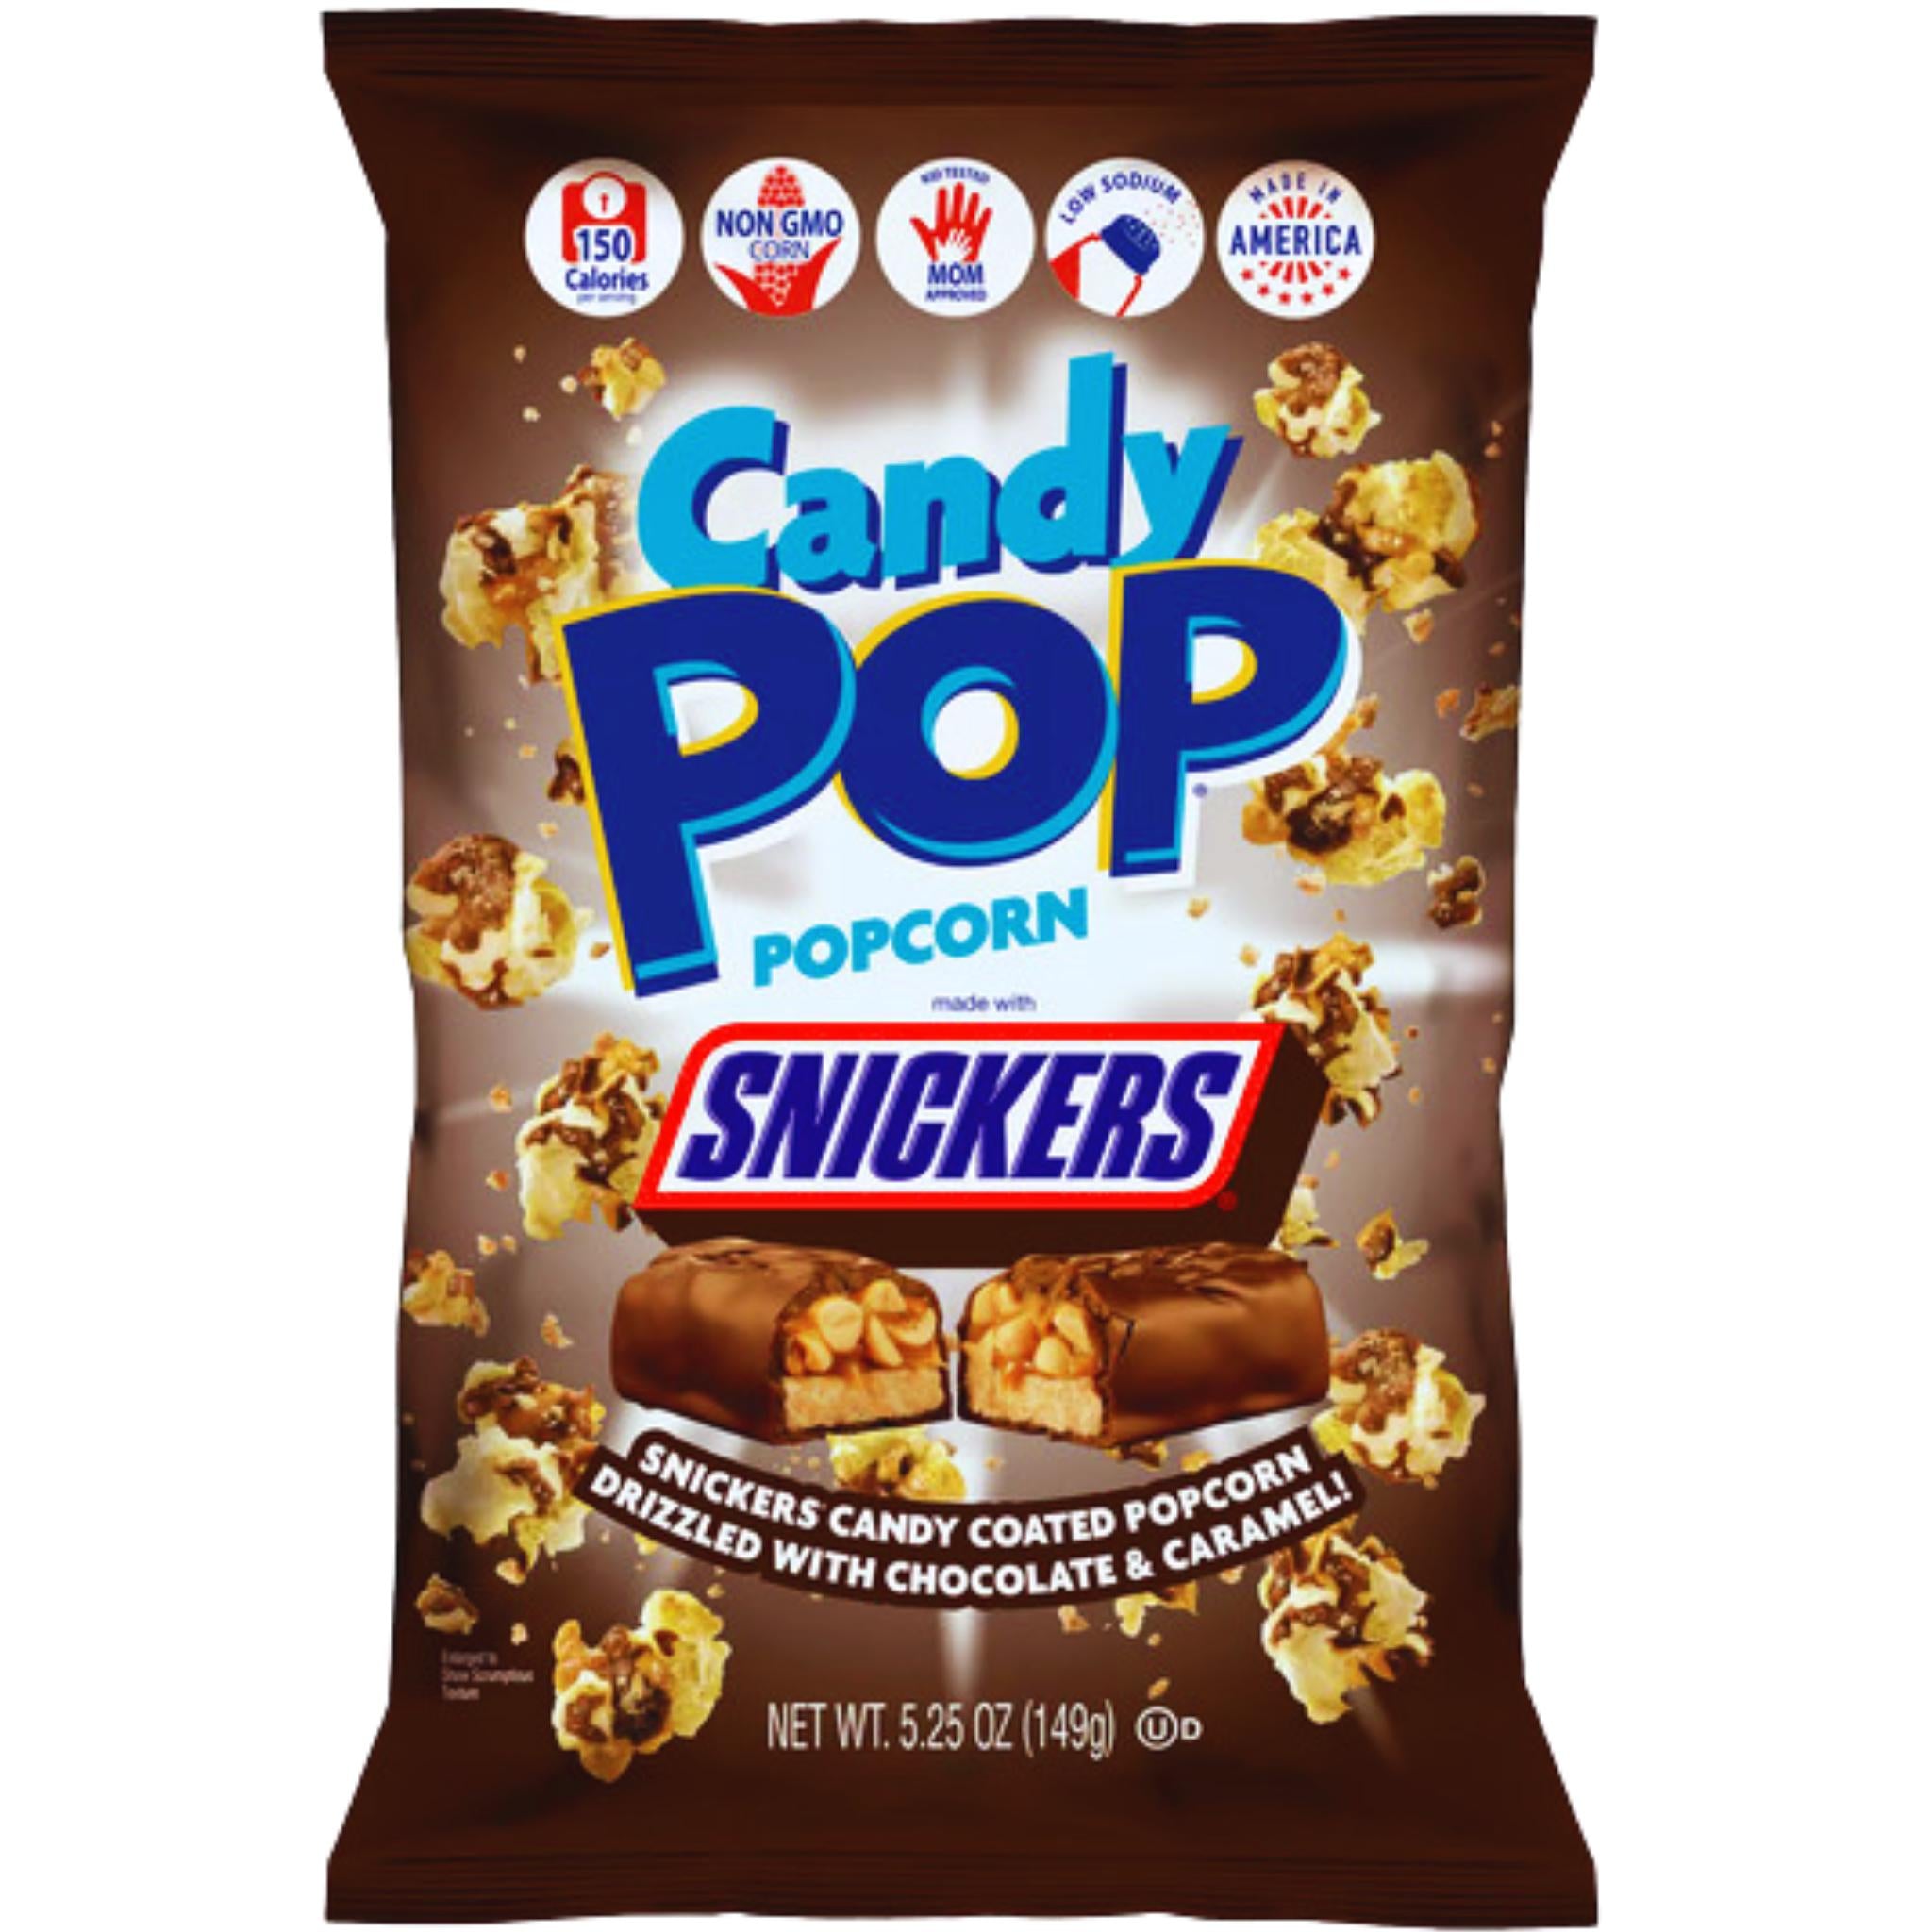 Candy Pop Popcorn Snickers - 149g